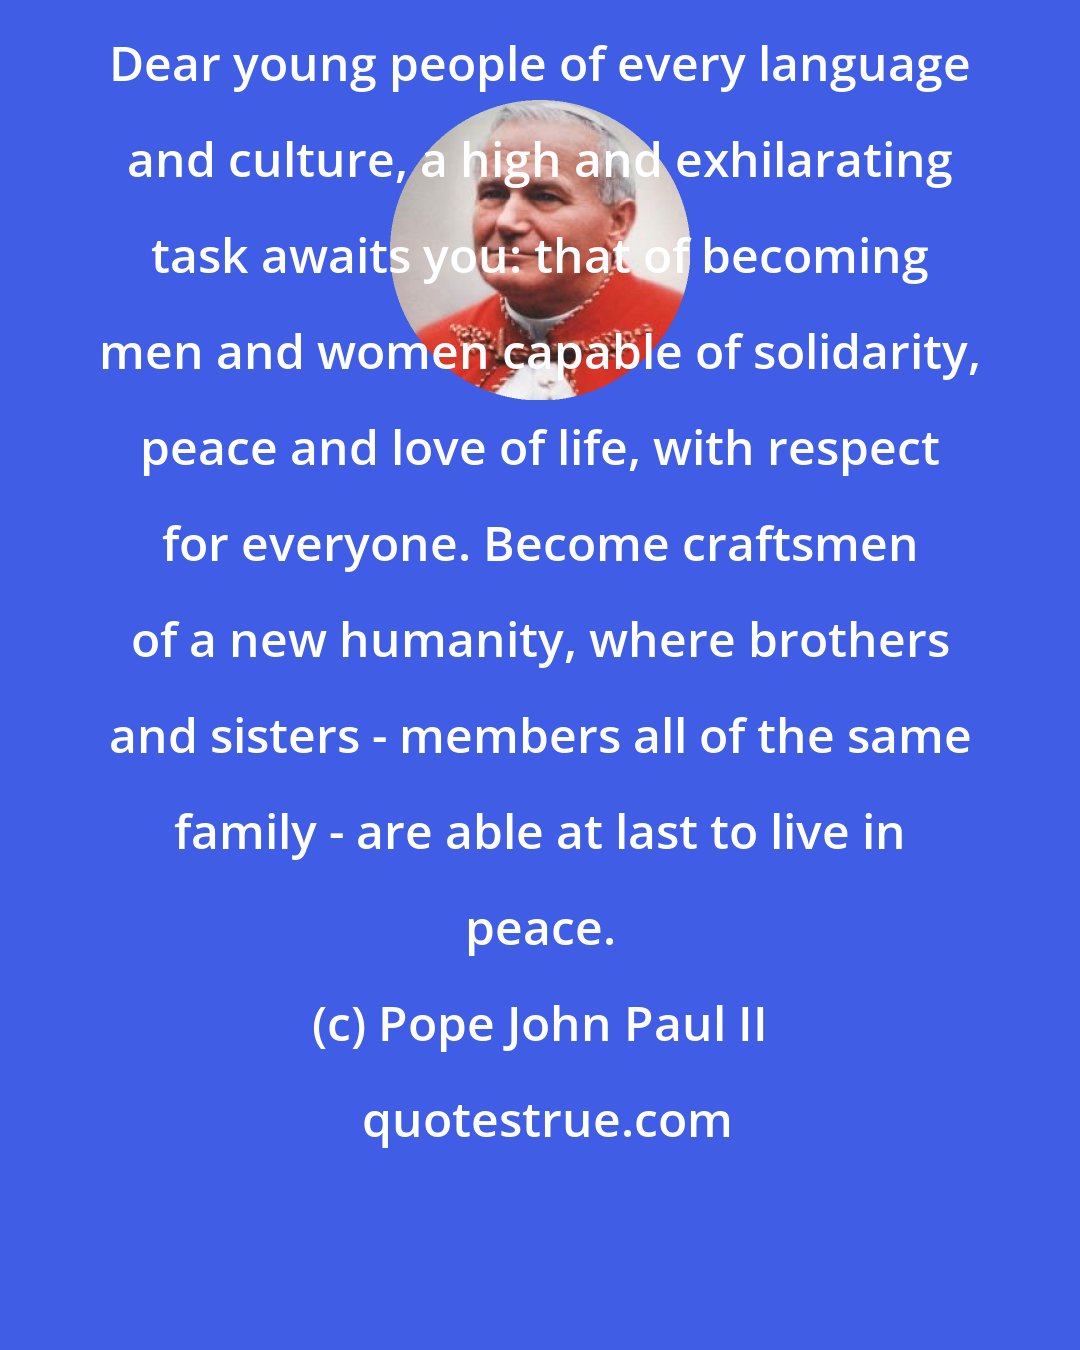 Pope John Paul II: Dear young people of every language and culture, a high and exhilarating task awaits you: that of becoming men and women capable of solidarity, peace and love of life, with respect for everyone. Become craftsmen of a new humanity, where brothers and sisters - members all of the same family - are able at last to live in peace.